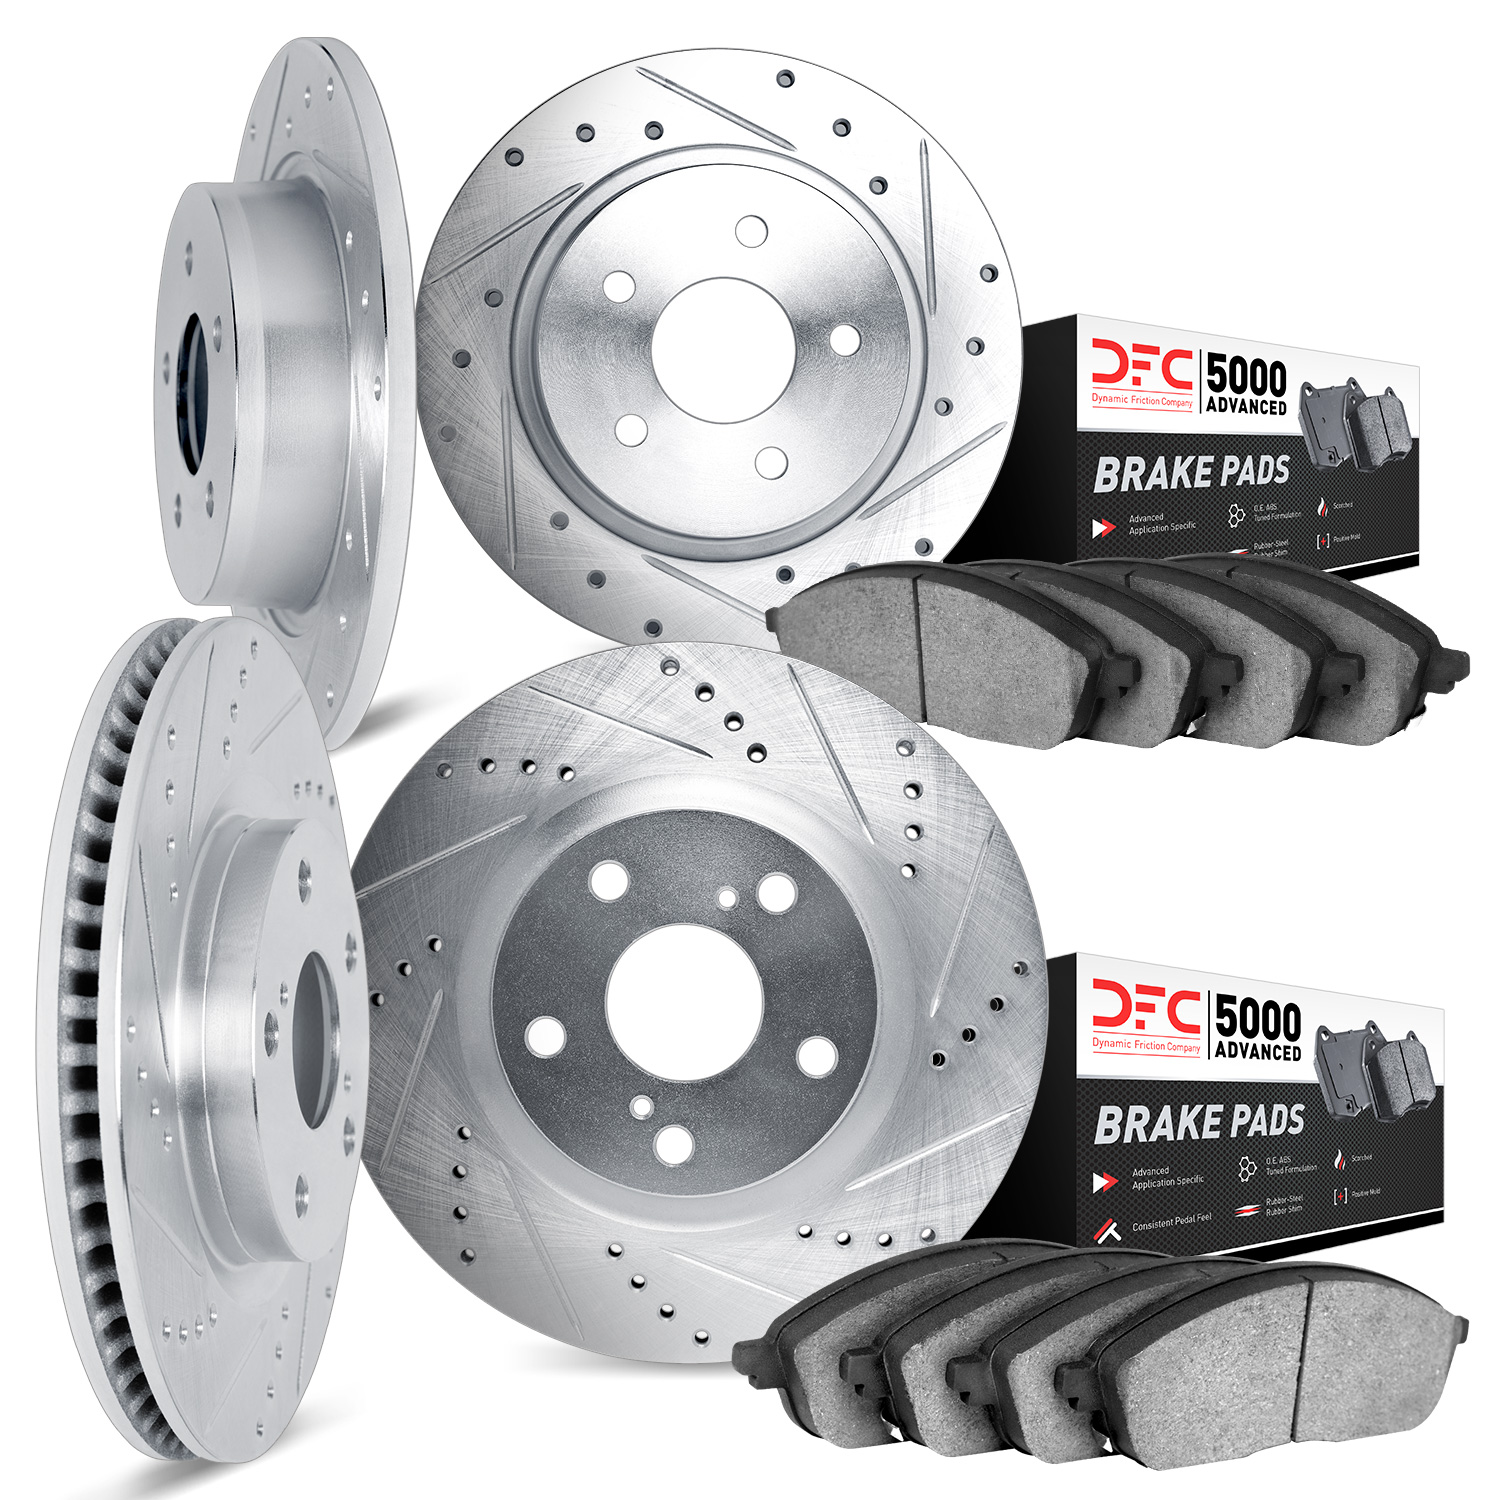 7504-58004 Drilled/Slotted Brake Rotors w/5000 Advanced Brake Pads Kit [Silver], 2009-2014 Acura/Honda, Position: Front and Rear